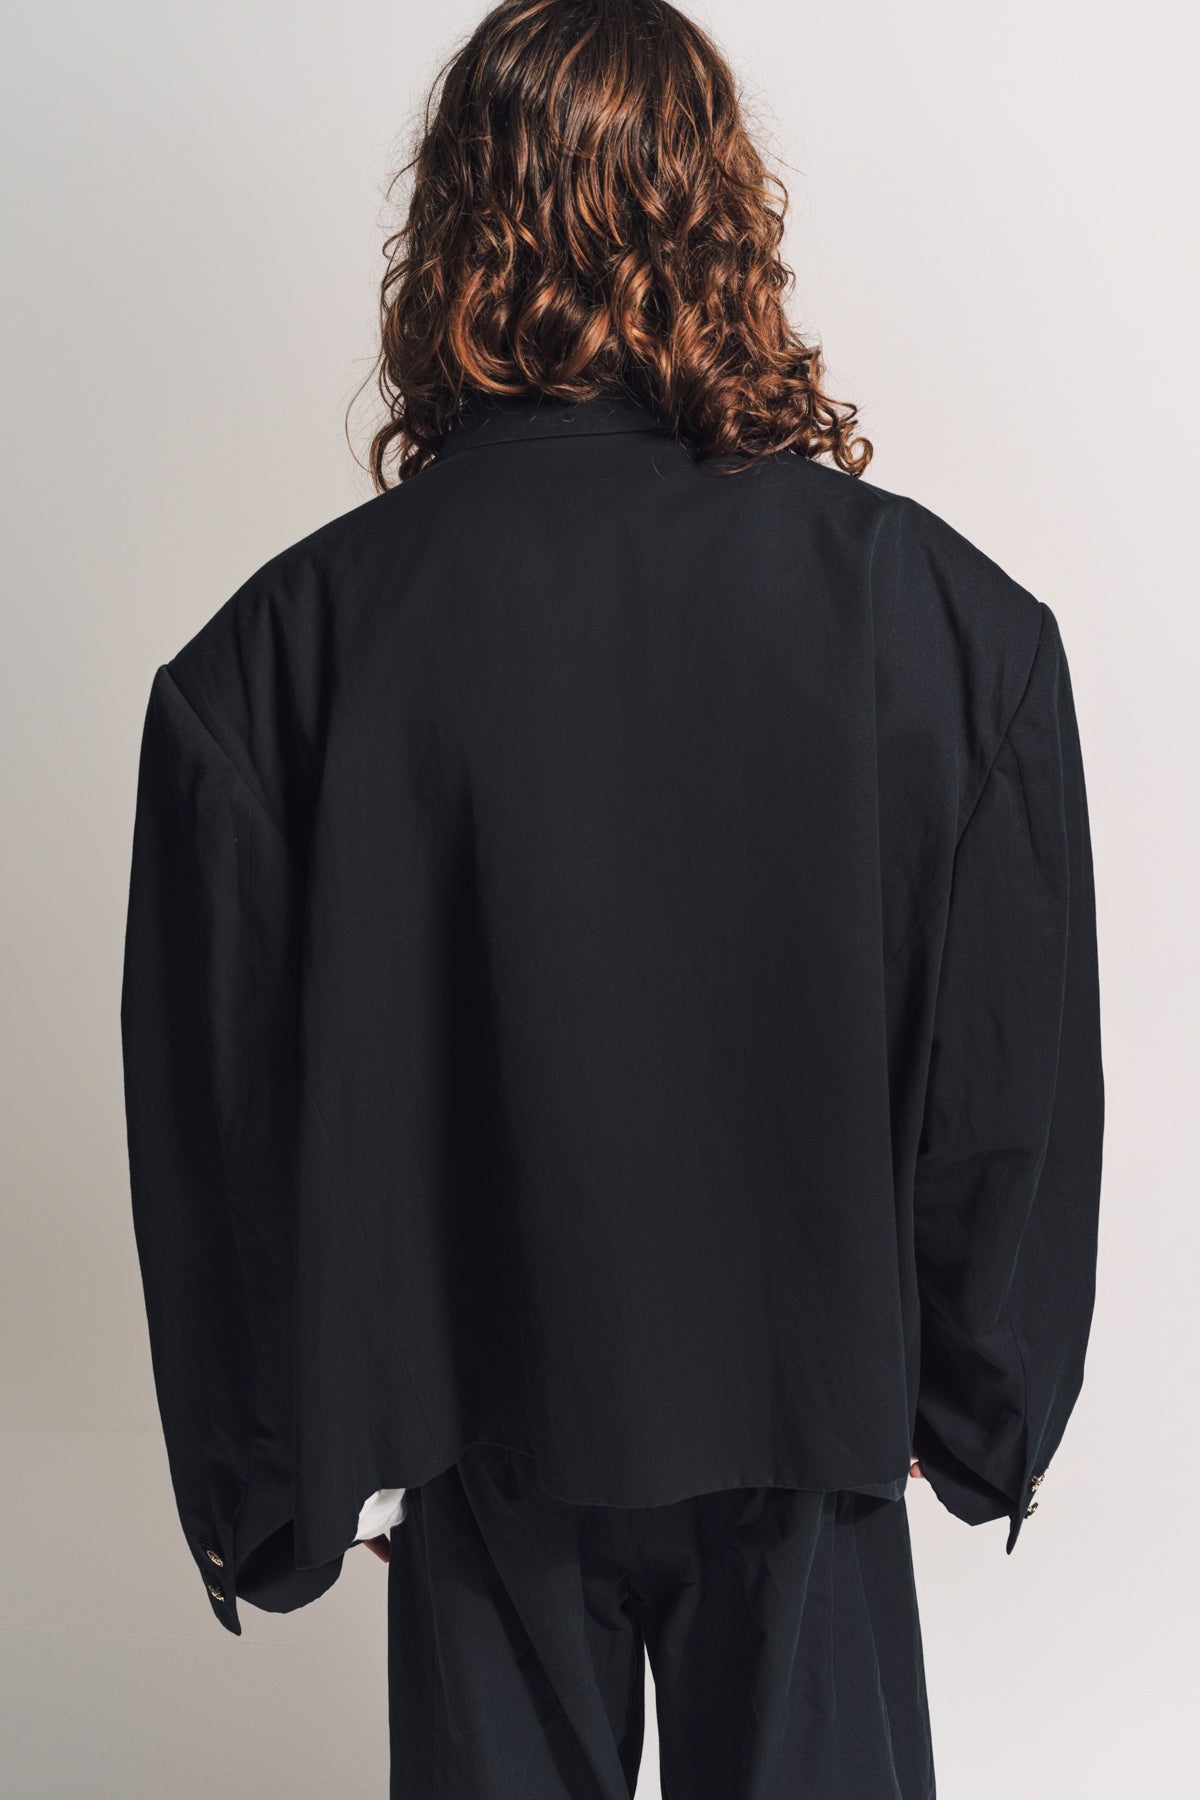 WILLY CHAVARRIA | BOX CUTTER JACKET